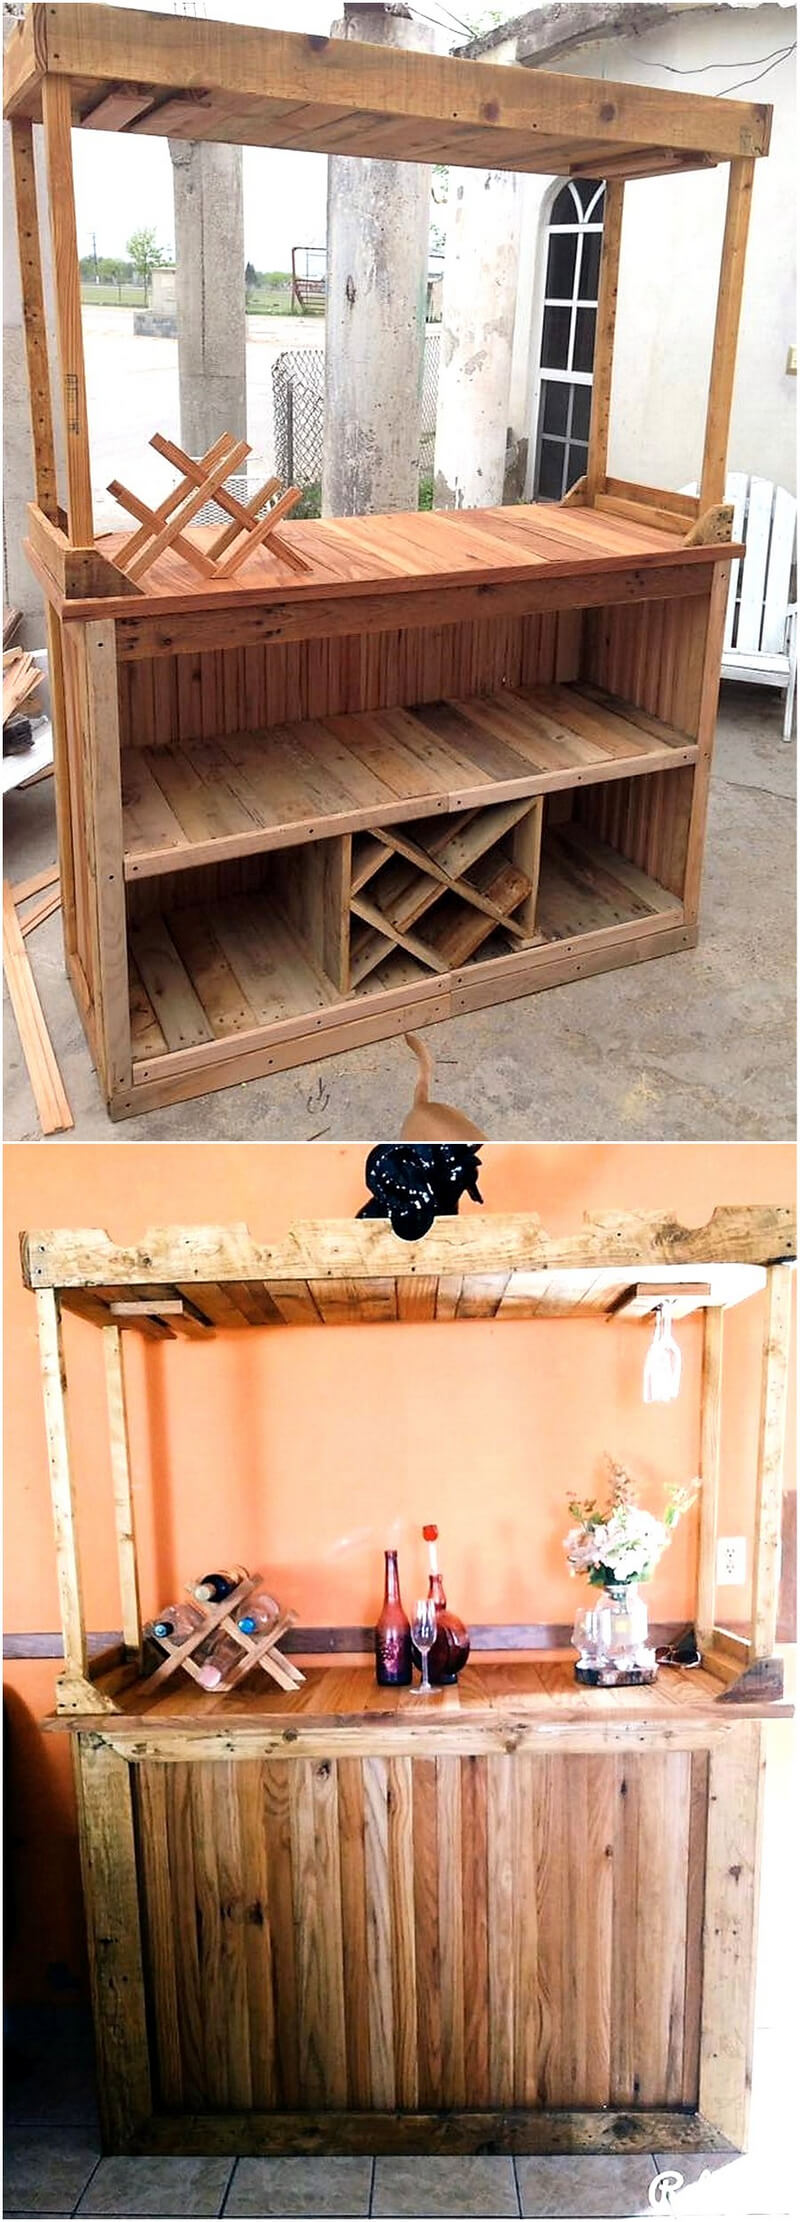 Convert Old Used Pallets Into Something Useful | Wood ...